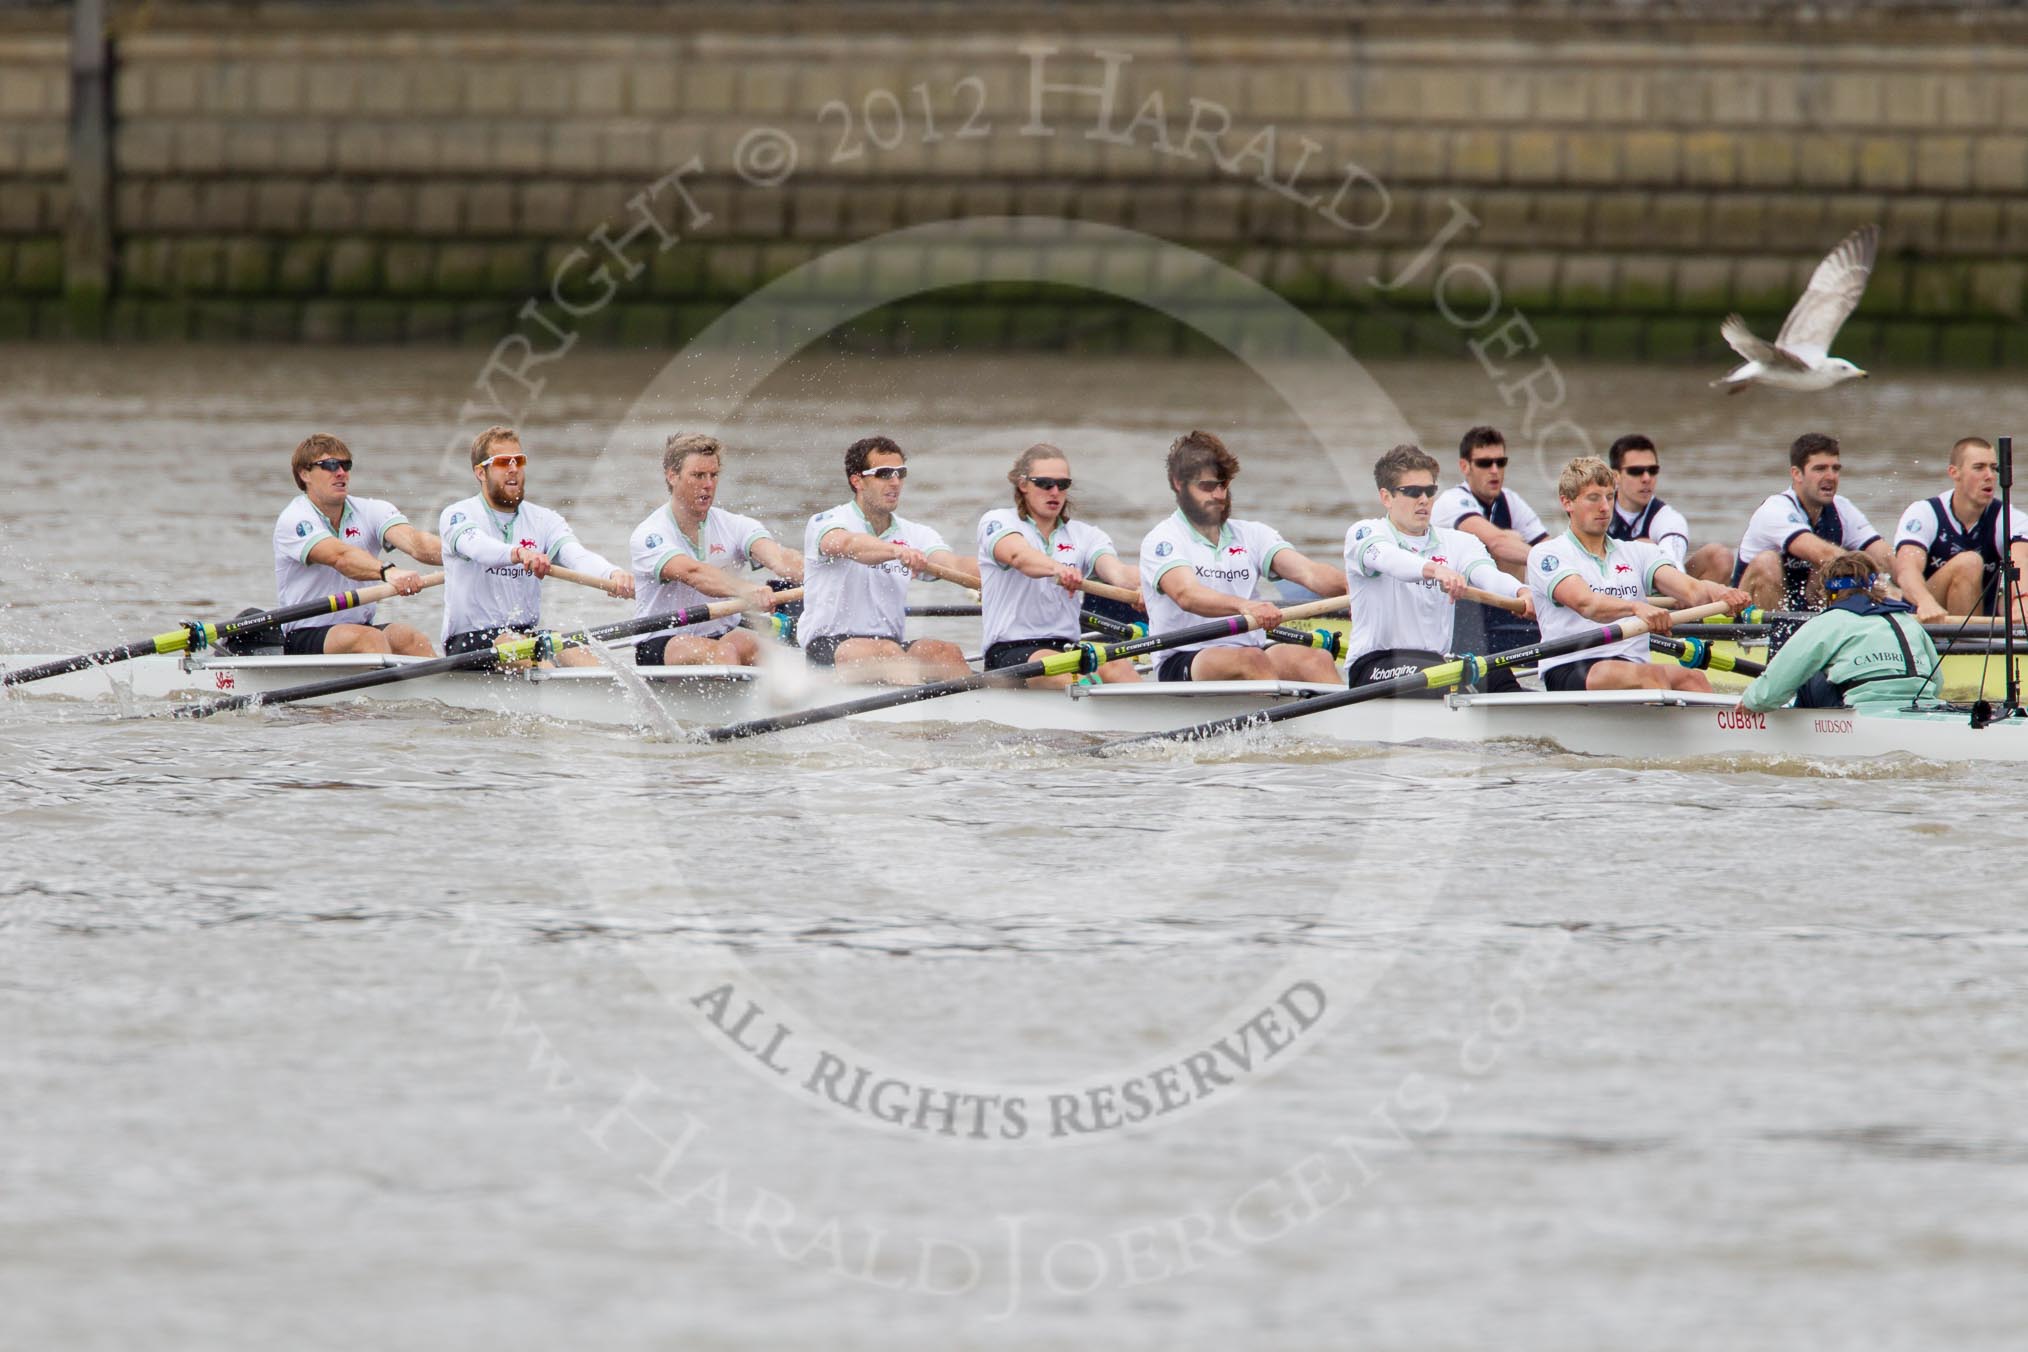 The Boat Race 2012: The 2012 Boat Race, shortly after the start: In the foreground the Cambridge Blue Boat, with David Nelson, Moritz Schramm, Jack Lindeman, Alex Ross, Mike Thorp, Steve Dudek, Alexander Scharp, Niles Garret, and cox Ed Bosson, in the Oxford boat Dr. Alexander Woods, William Zeng, Kevin Baum, and Alex Davidson..




on 07 April 2012 at 14:17, image #266